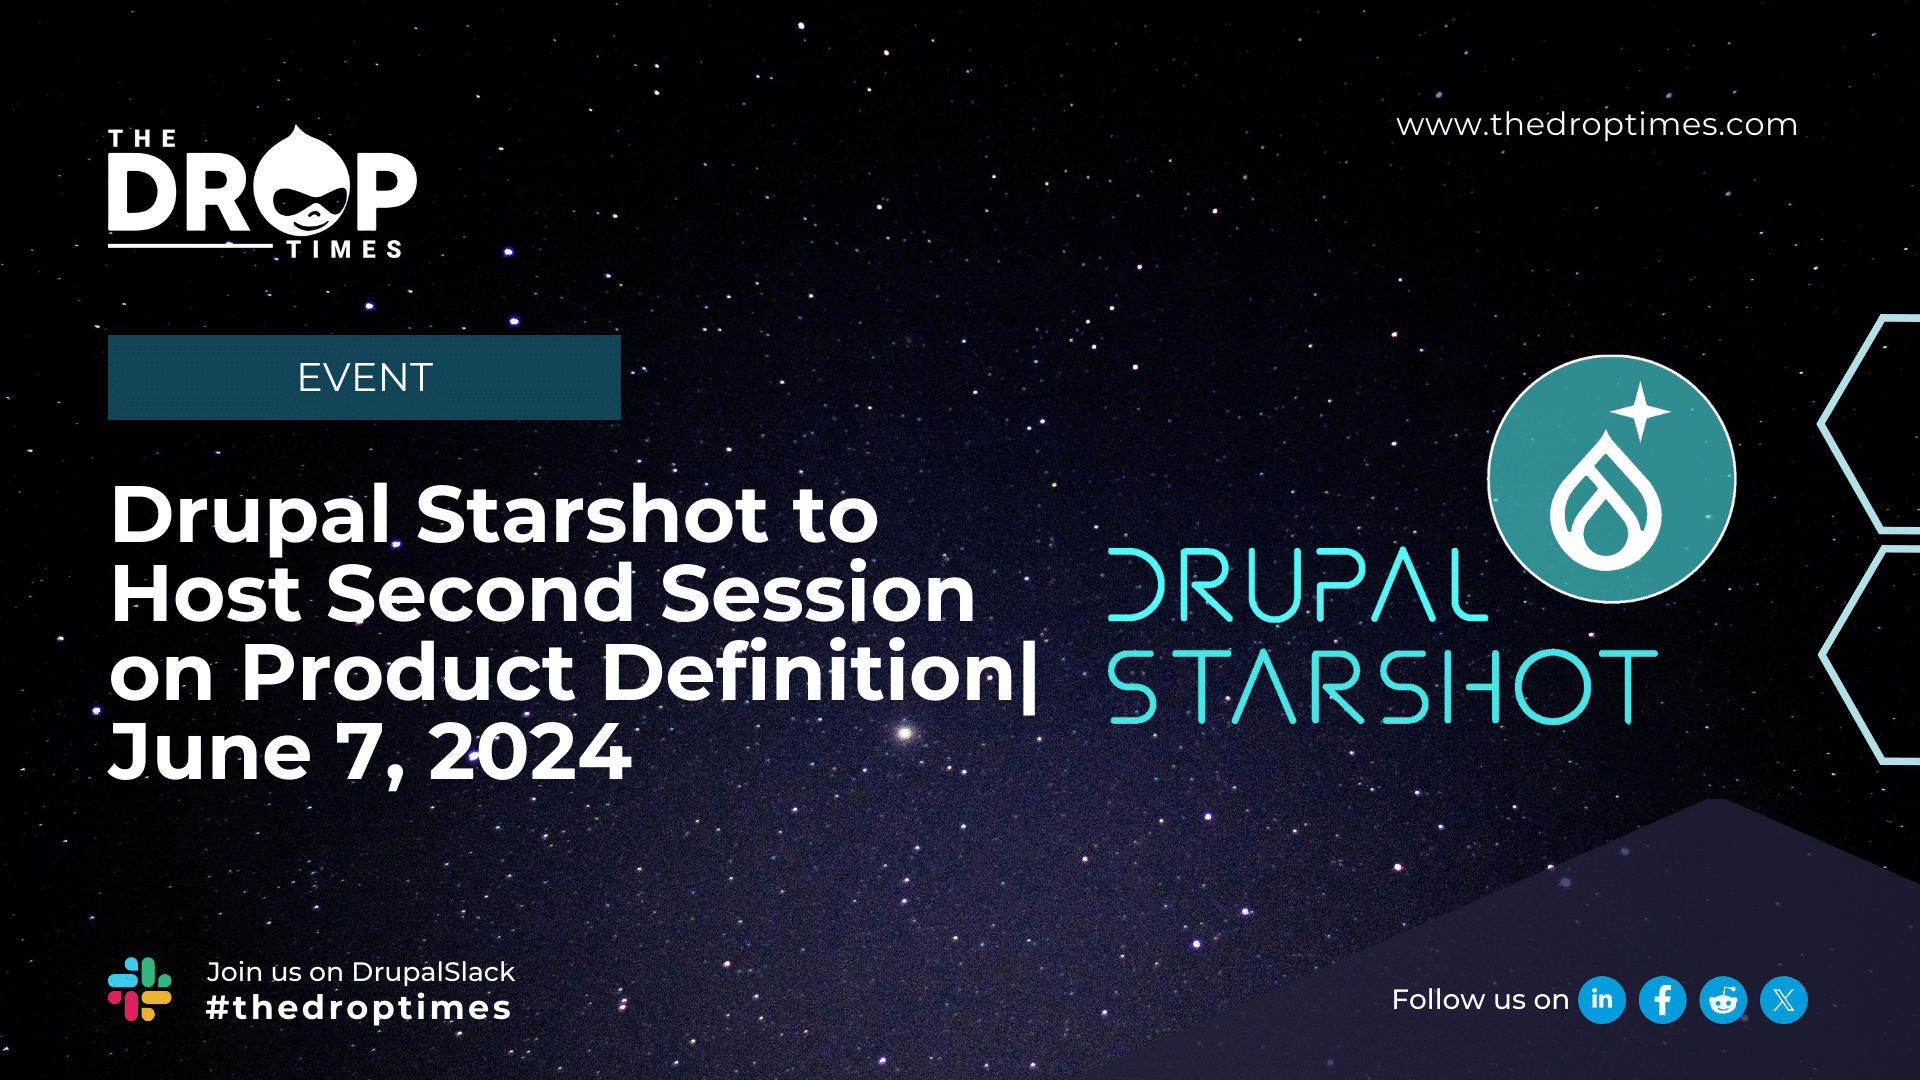 Drupal Starshot to Host Second Session on Product Definition| June 7, 2024